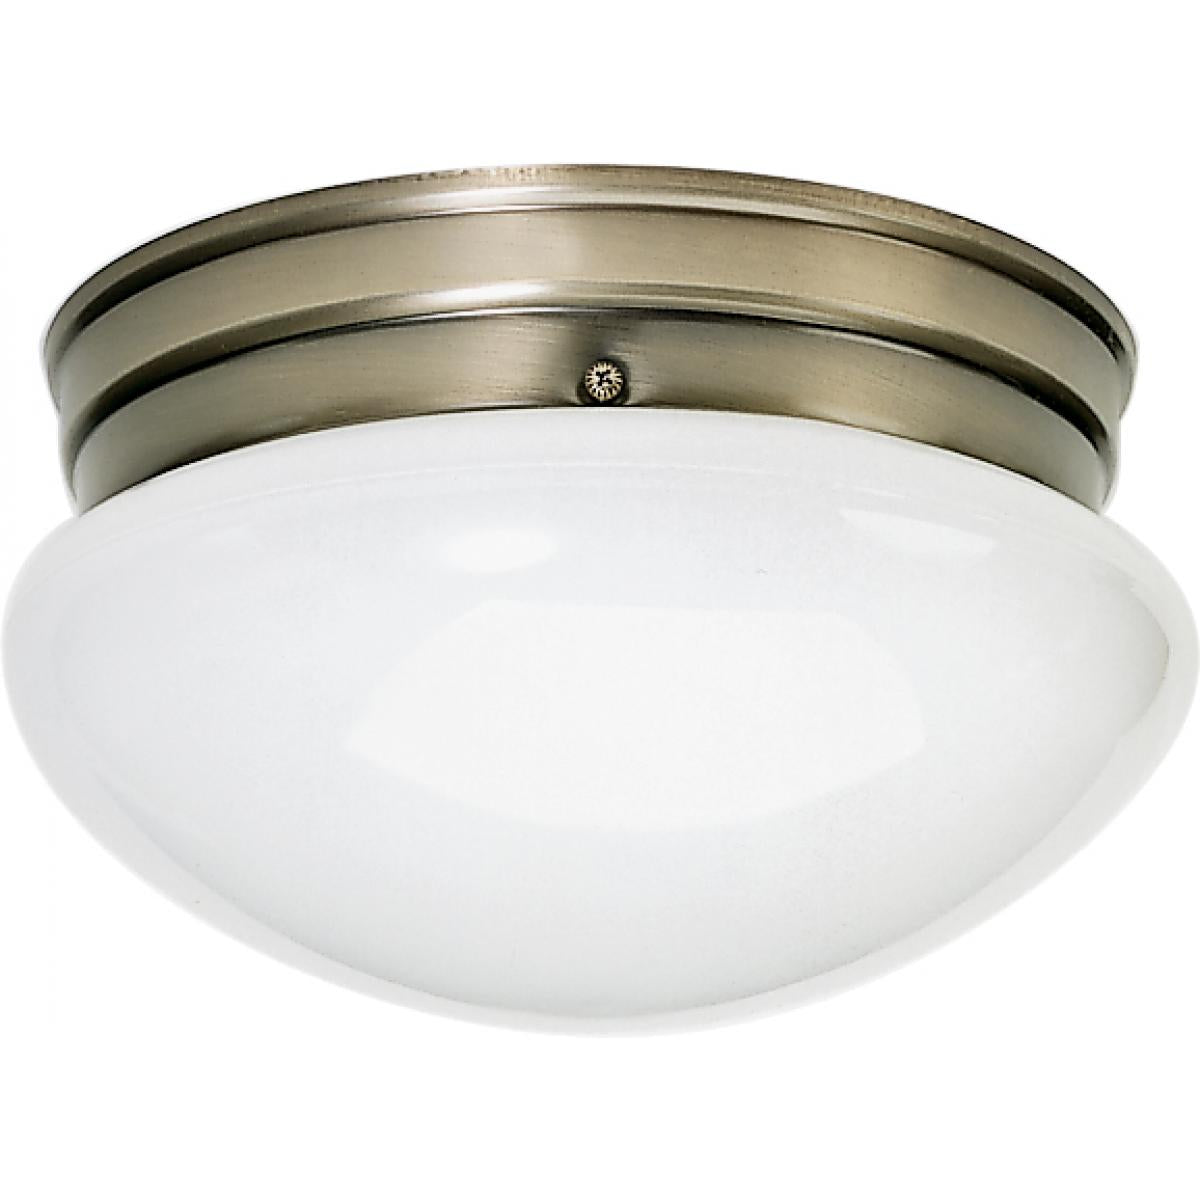 Satco 77-924 2 Light - 10" Flush with White Glass - Antique Brass Finish